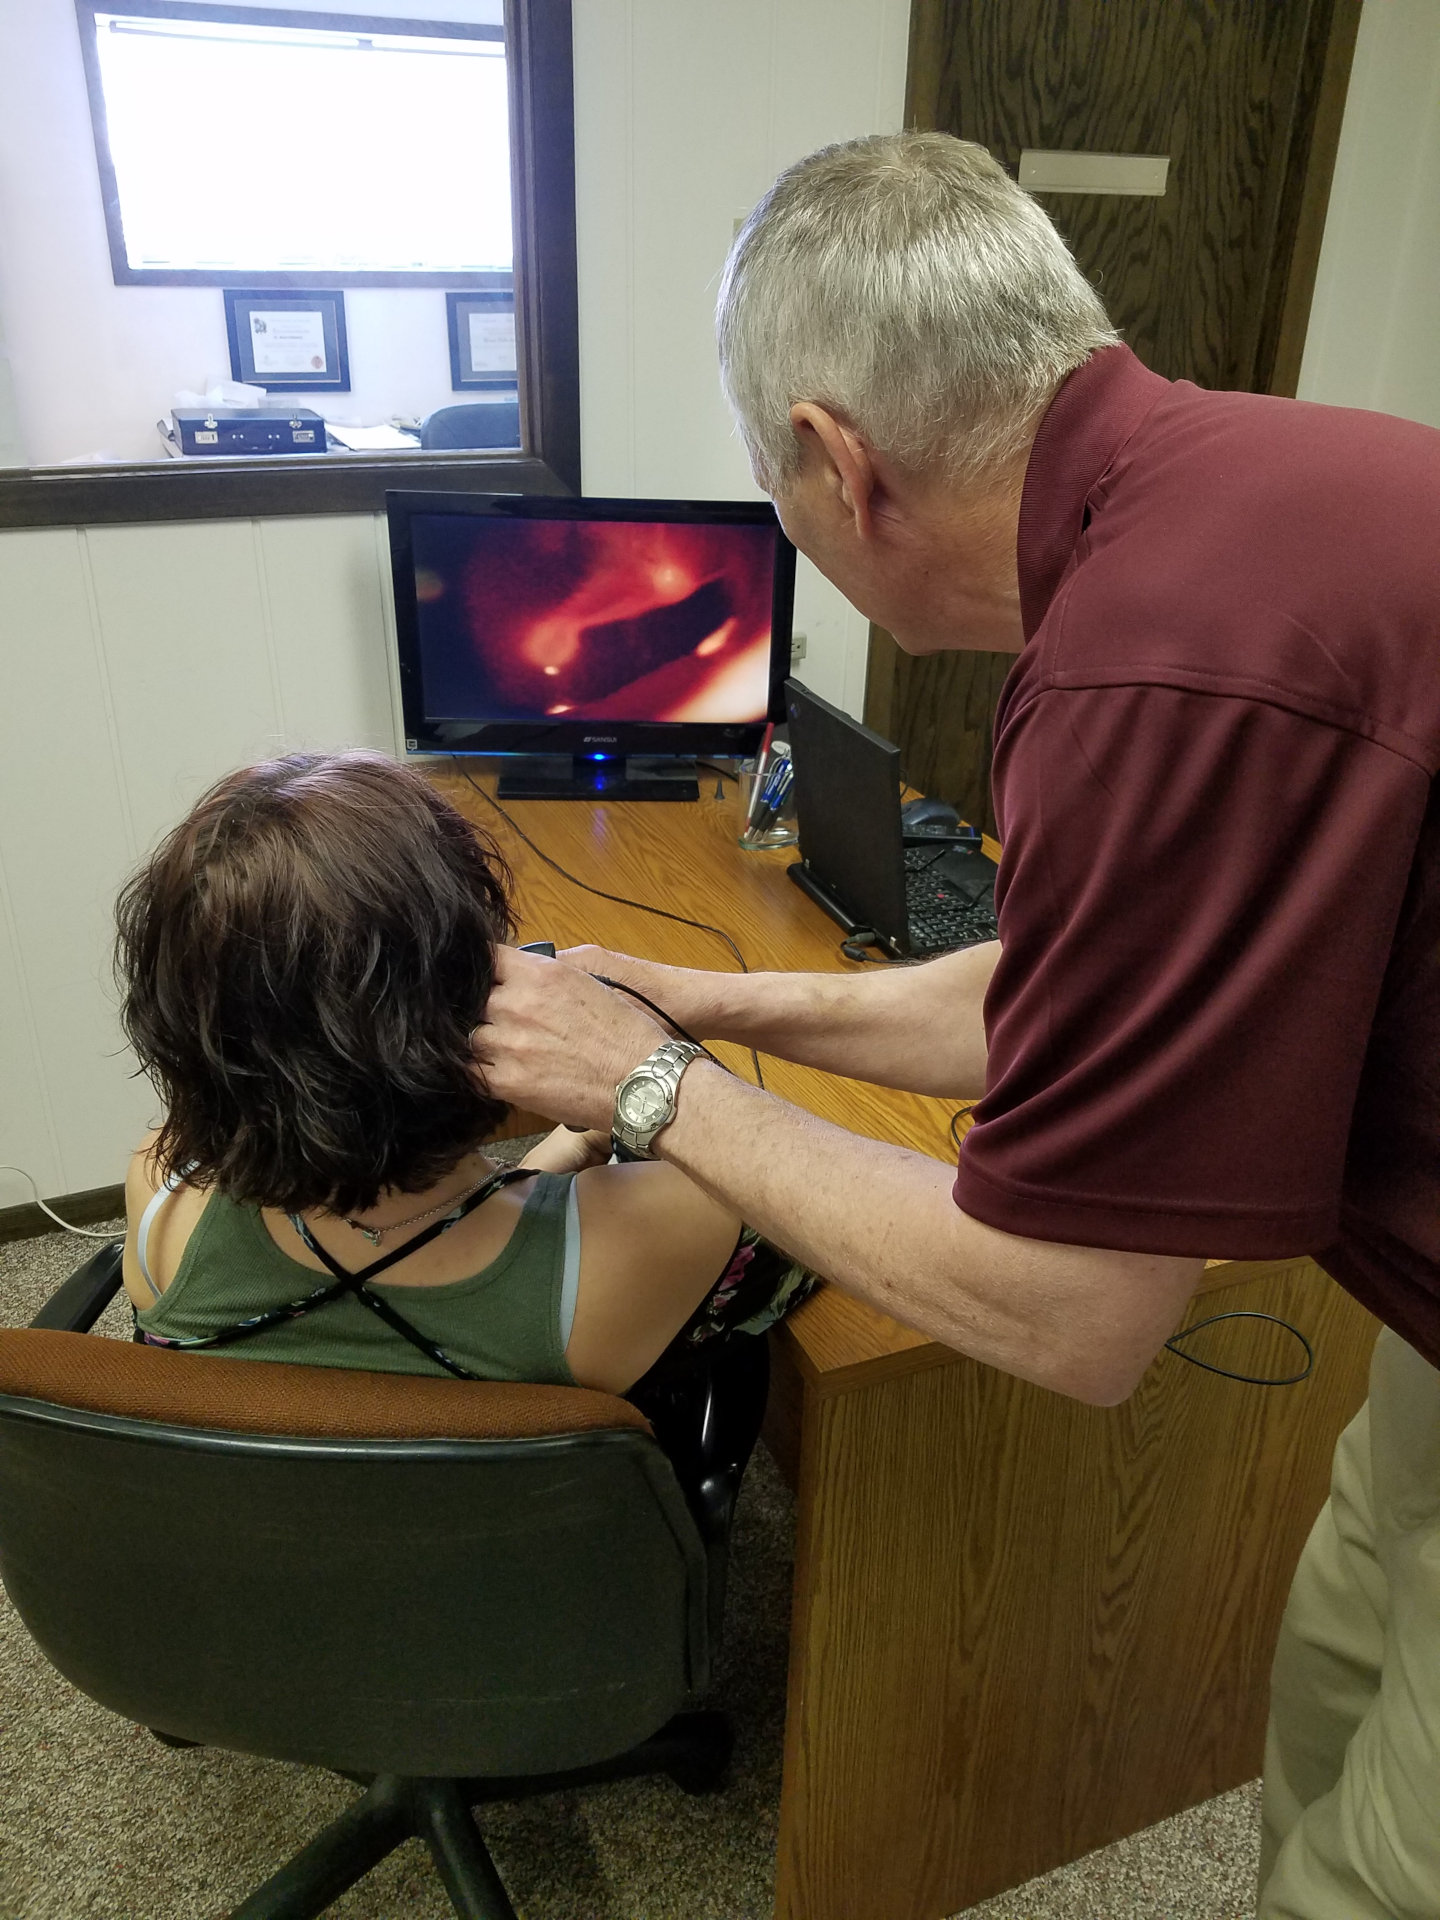 behind hearing specialist and patient at desk while he uses an instrument to examine patient ear